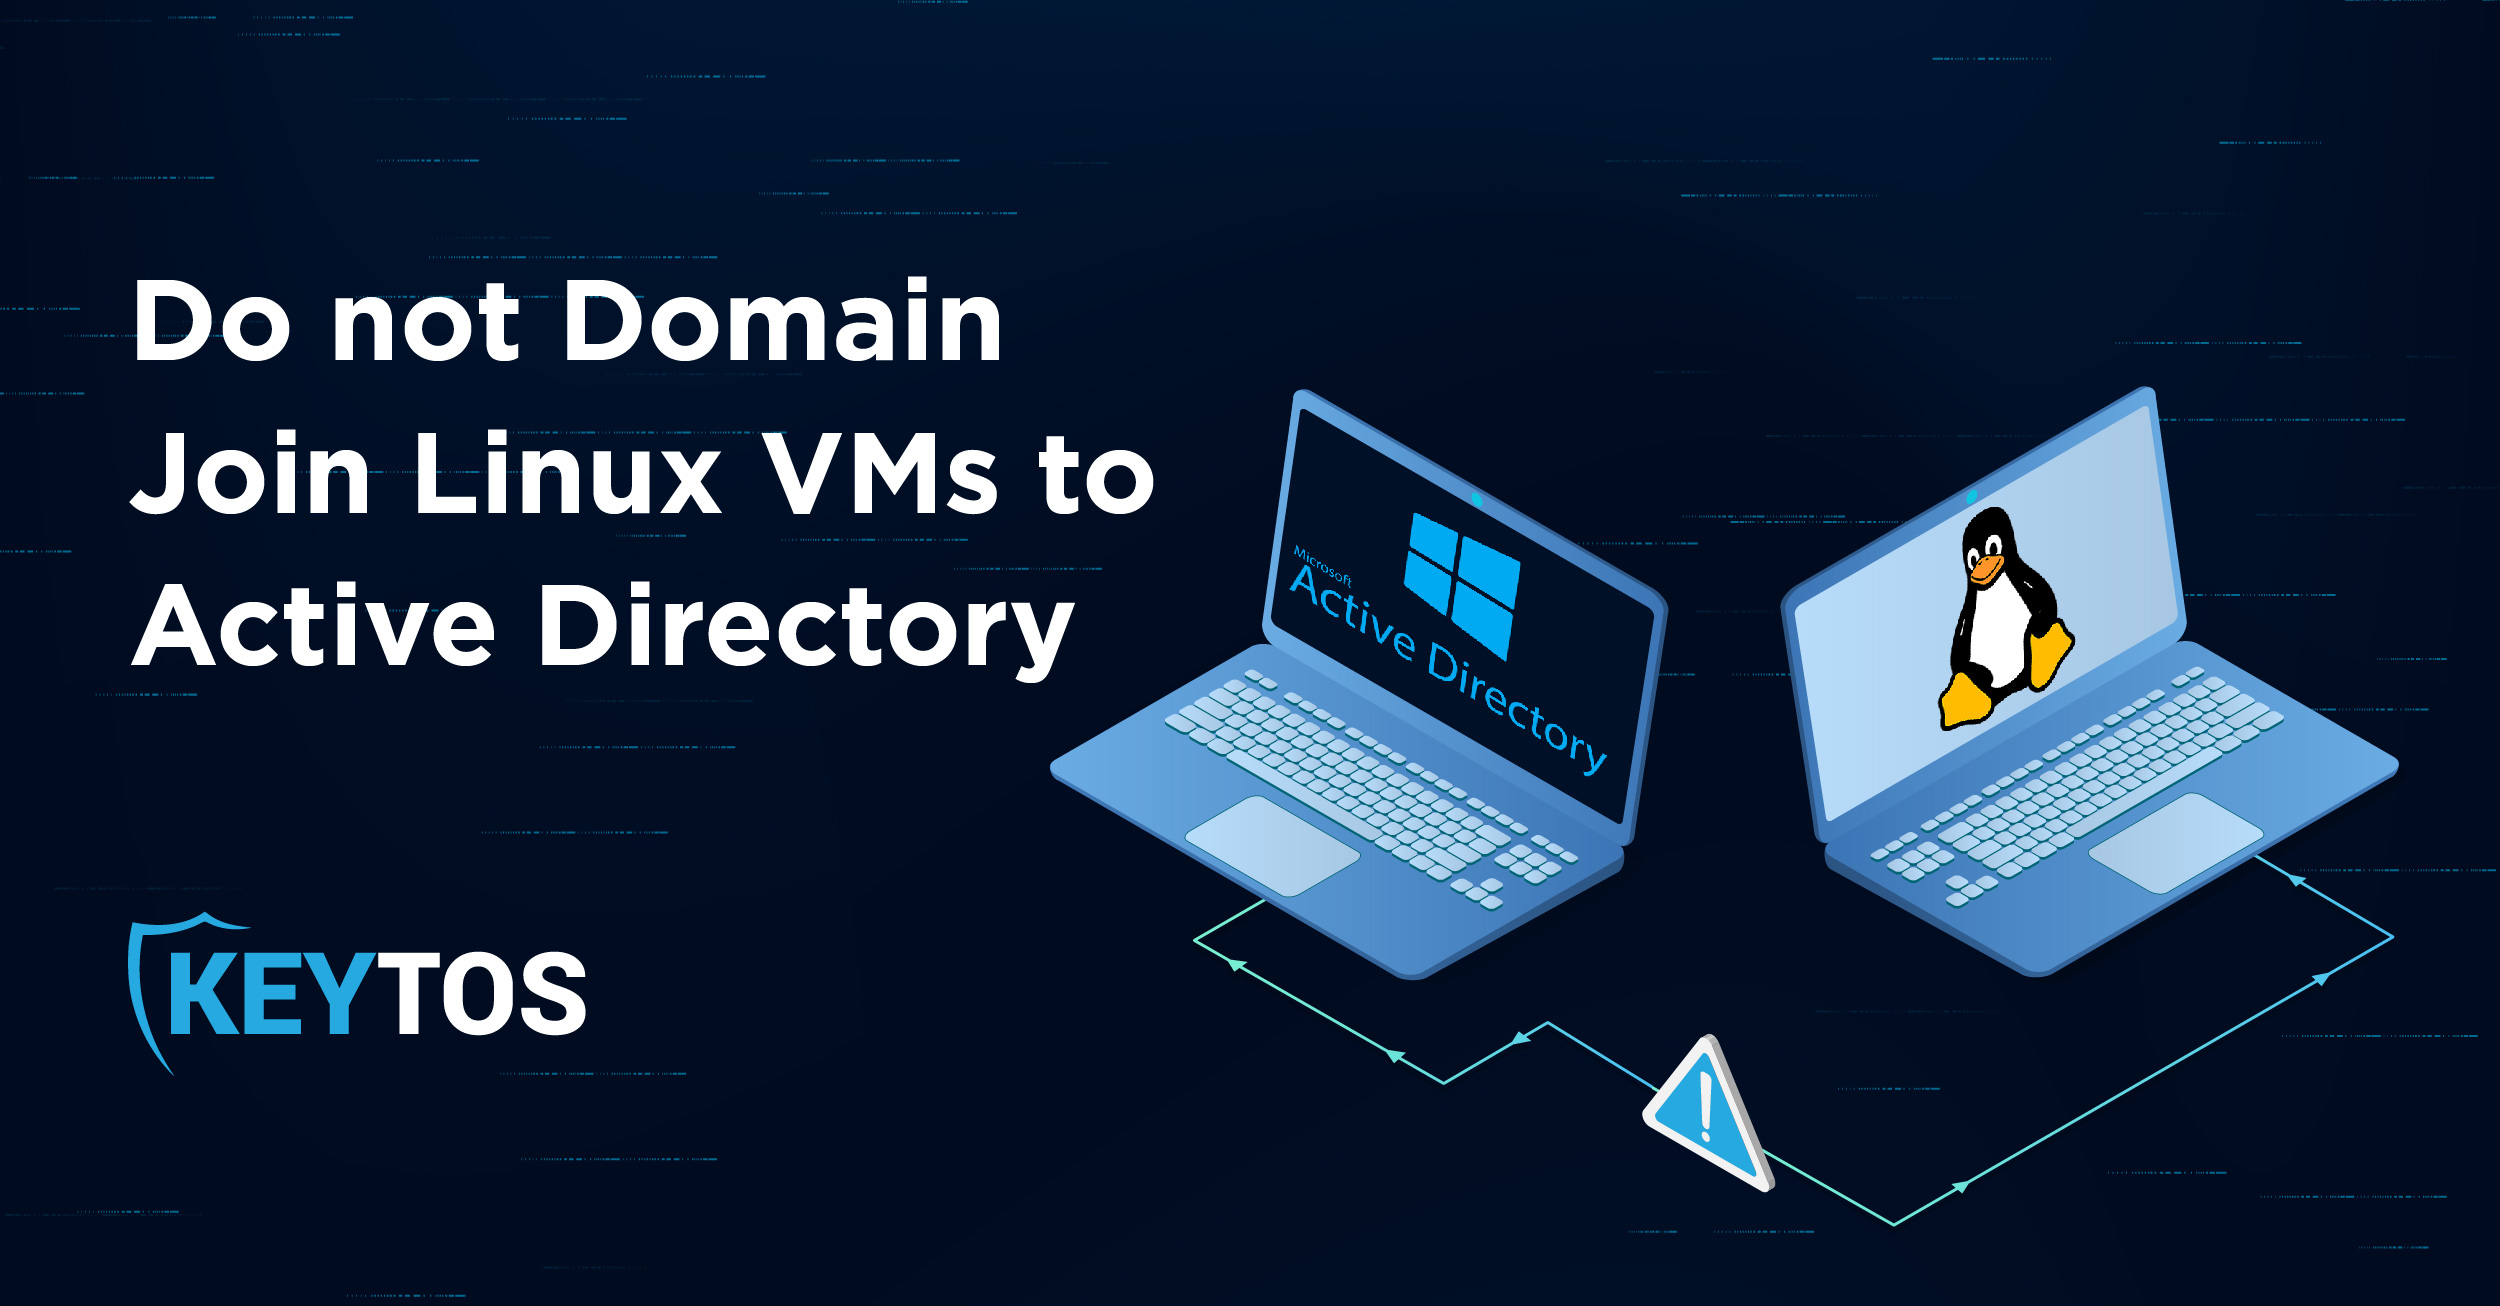 Why You Should Not Domain Join Linux VMs to Active Directory